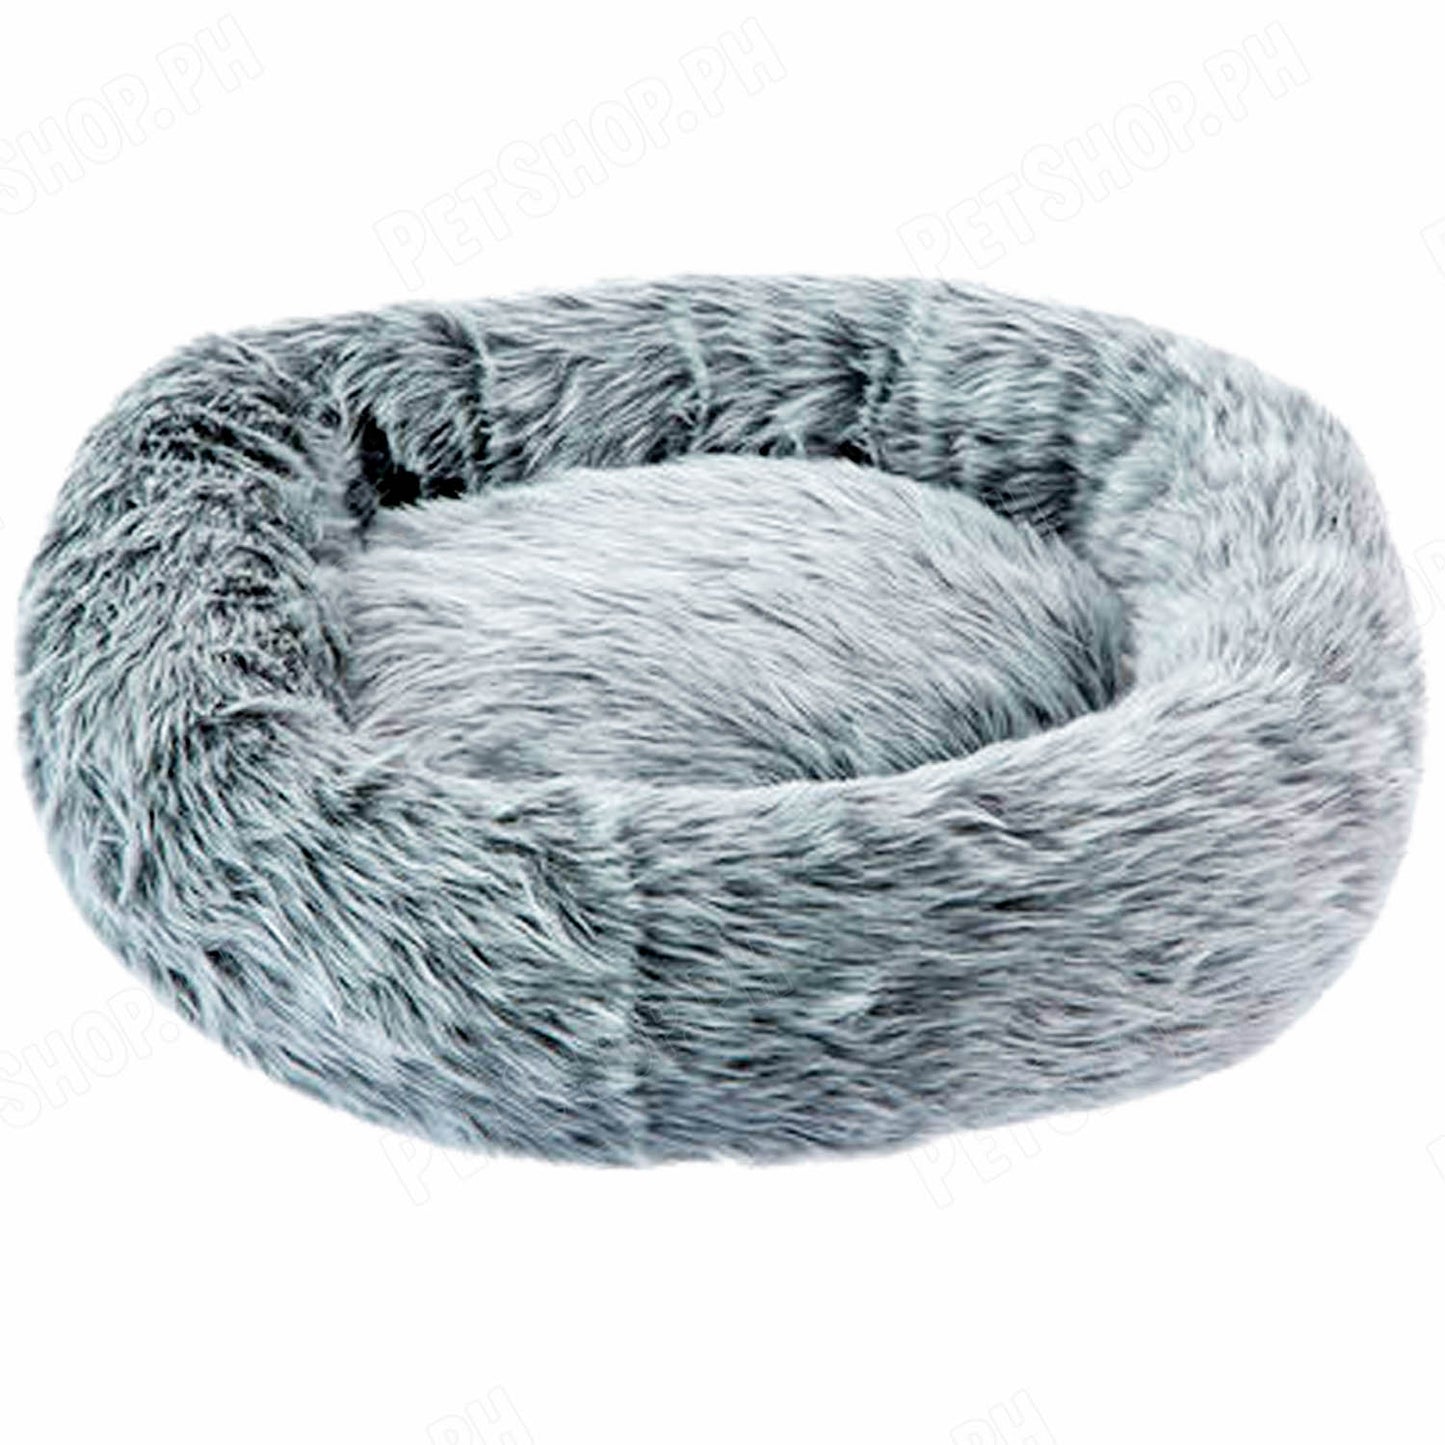 Pet Bed Round Bed Fur Plush Cushion Bed Cuddle Soft Bed for Dog & Cat